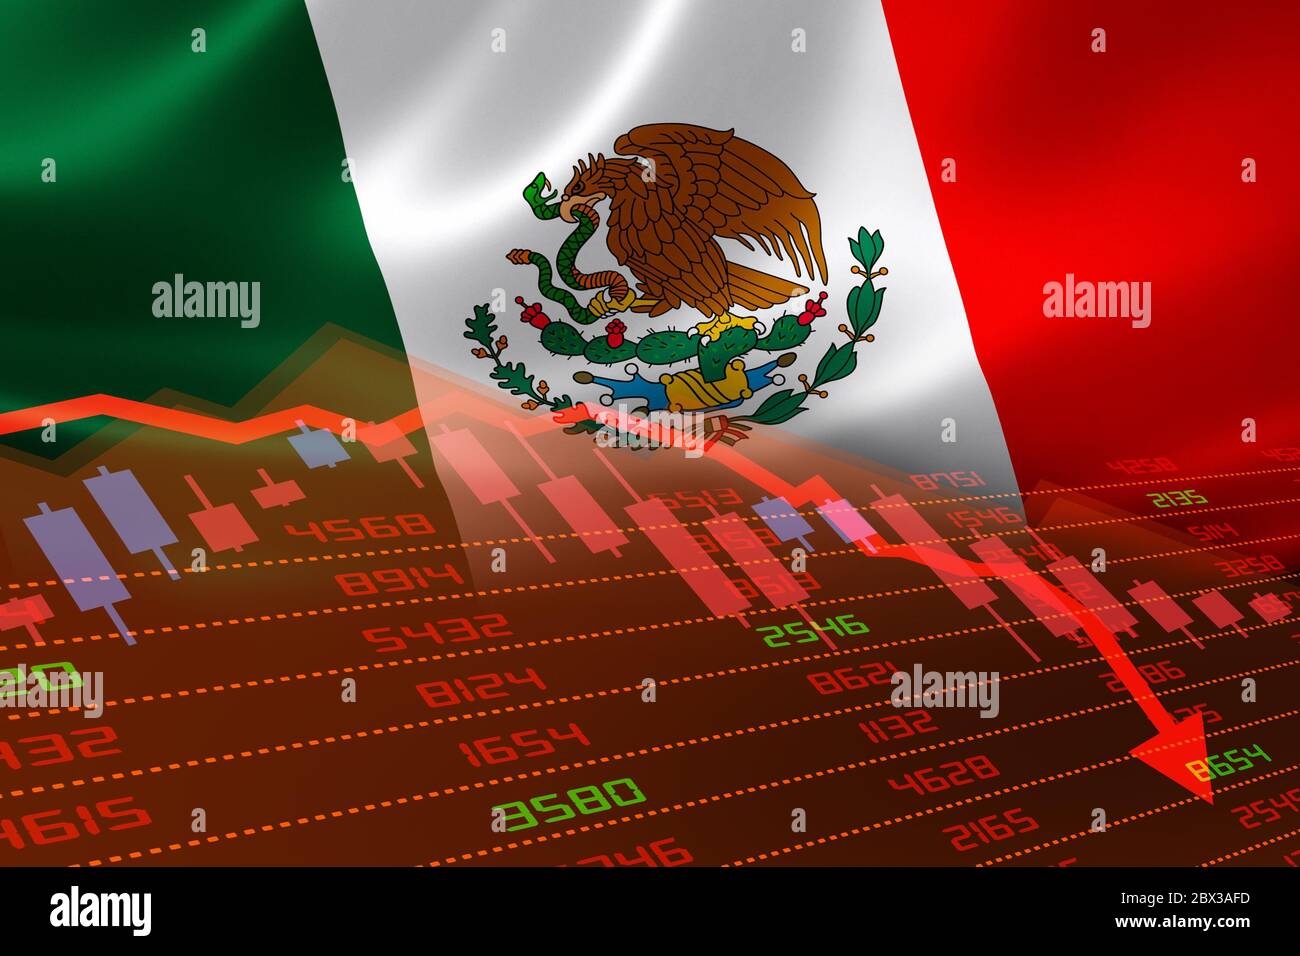 Mexico economic downturn with stock exchange market showing stock chart down and in red negative territory. Business and financial money market crisis Stock Photo